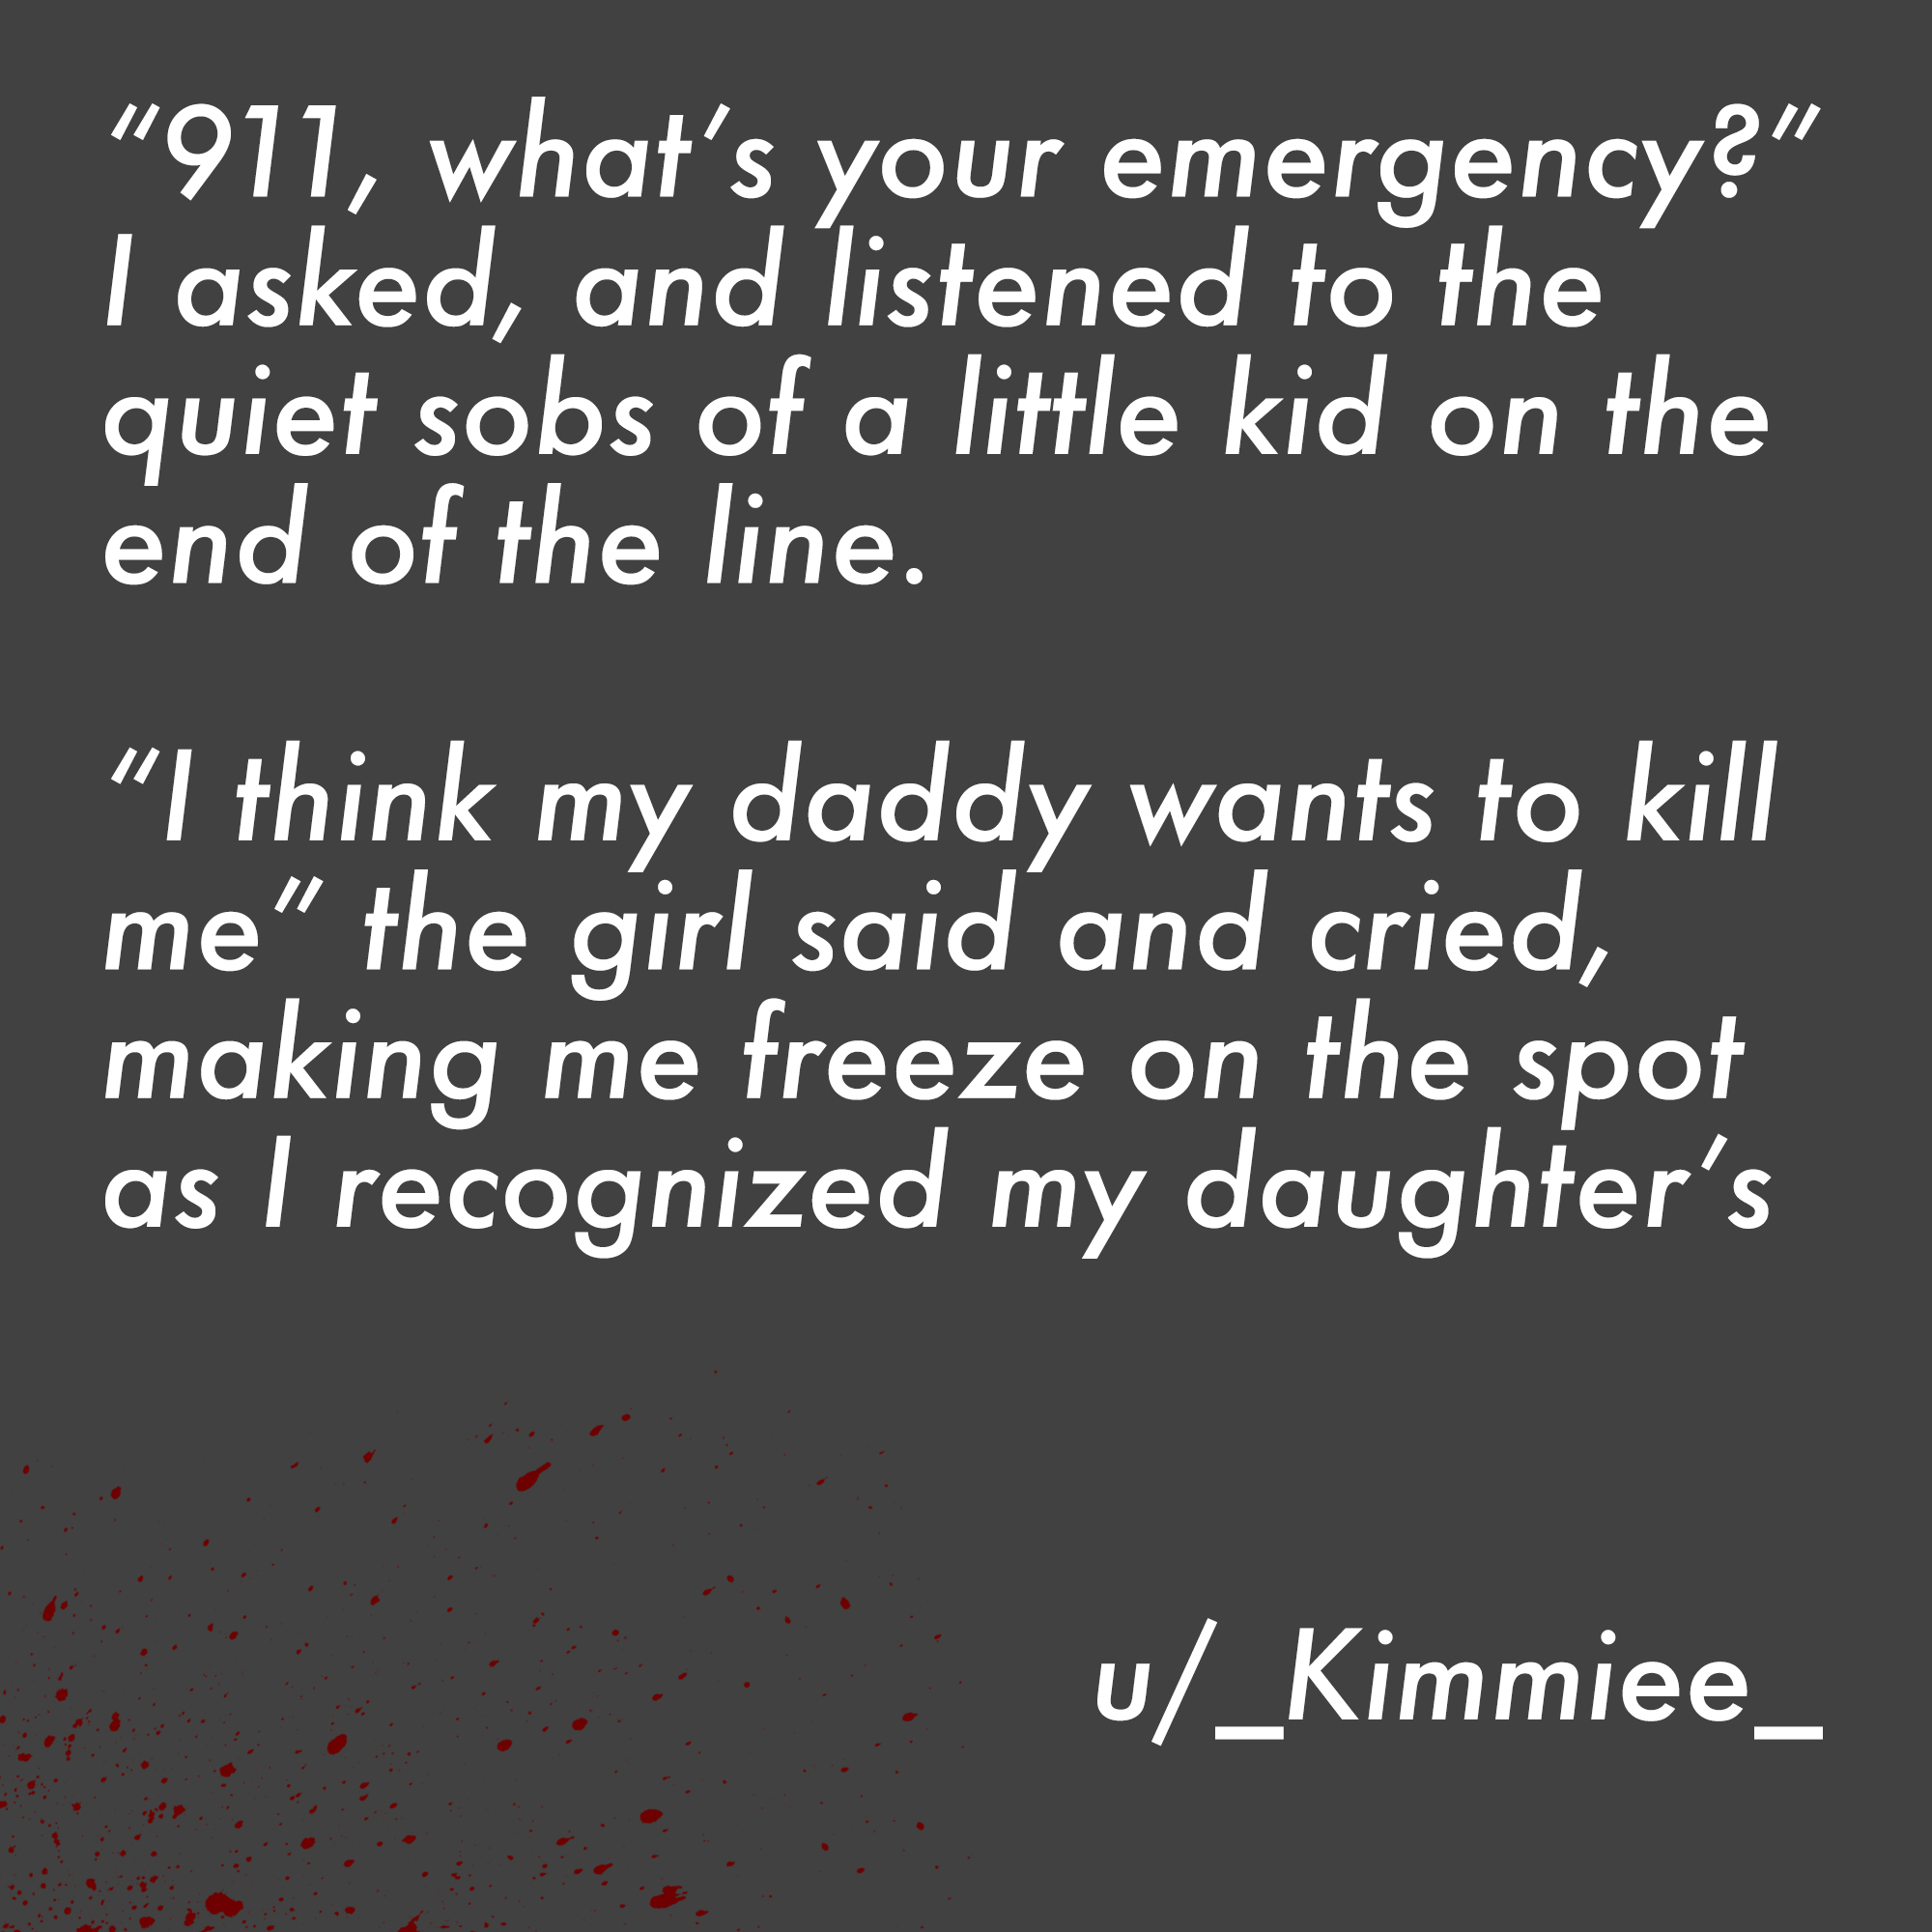 two line horror stories - poezi per shen valentini - "911, what's your emergency?" I asked, and listened to the quiet sobs of a little kid on the end of the line. "I think my daddy wants to kill me" the girl said and cried, making me freeze on the spot as